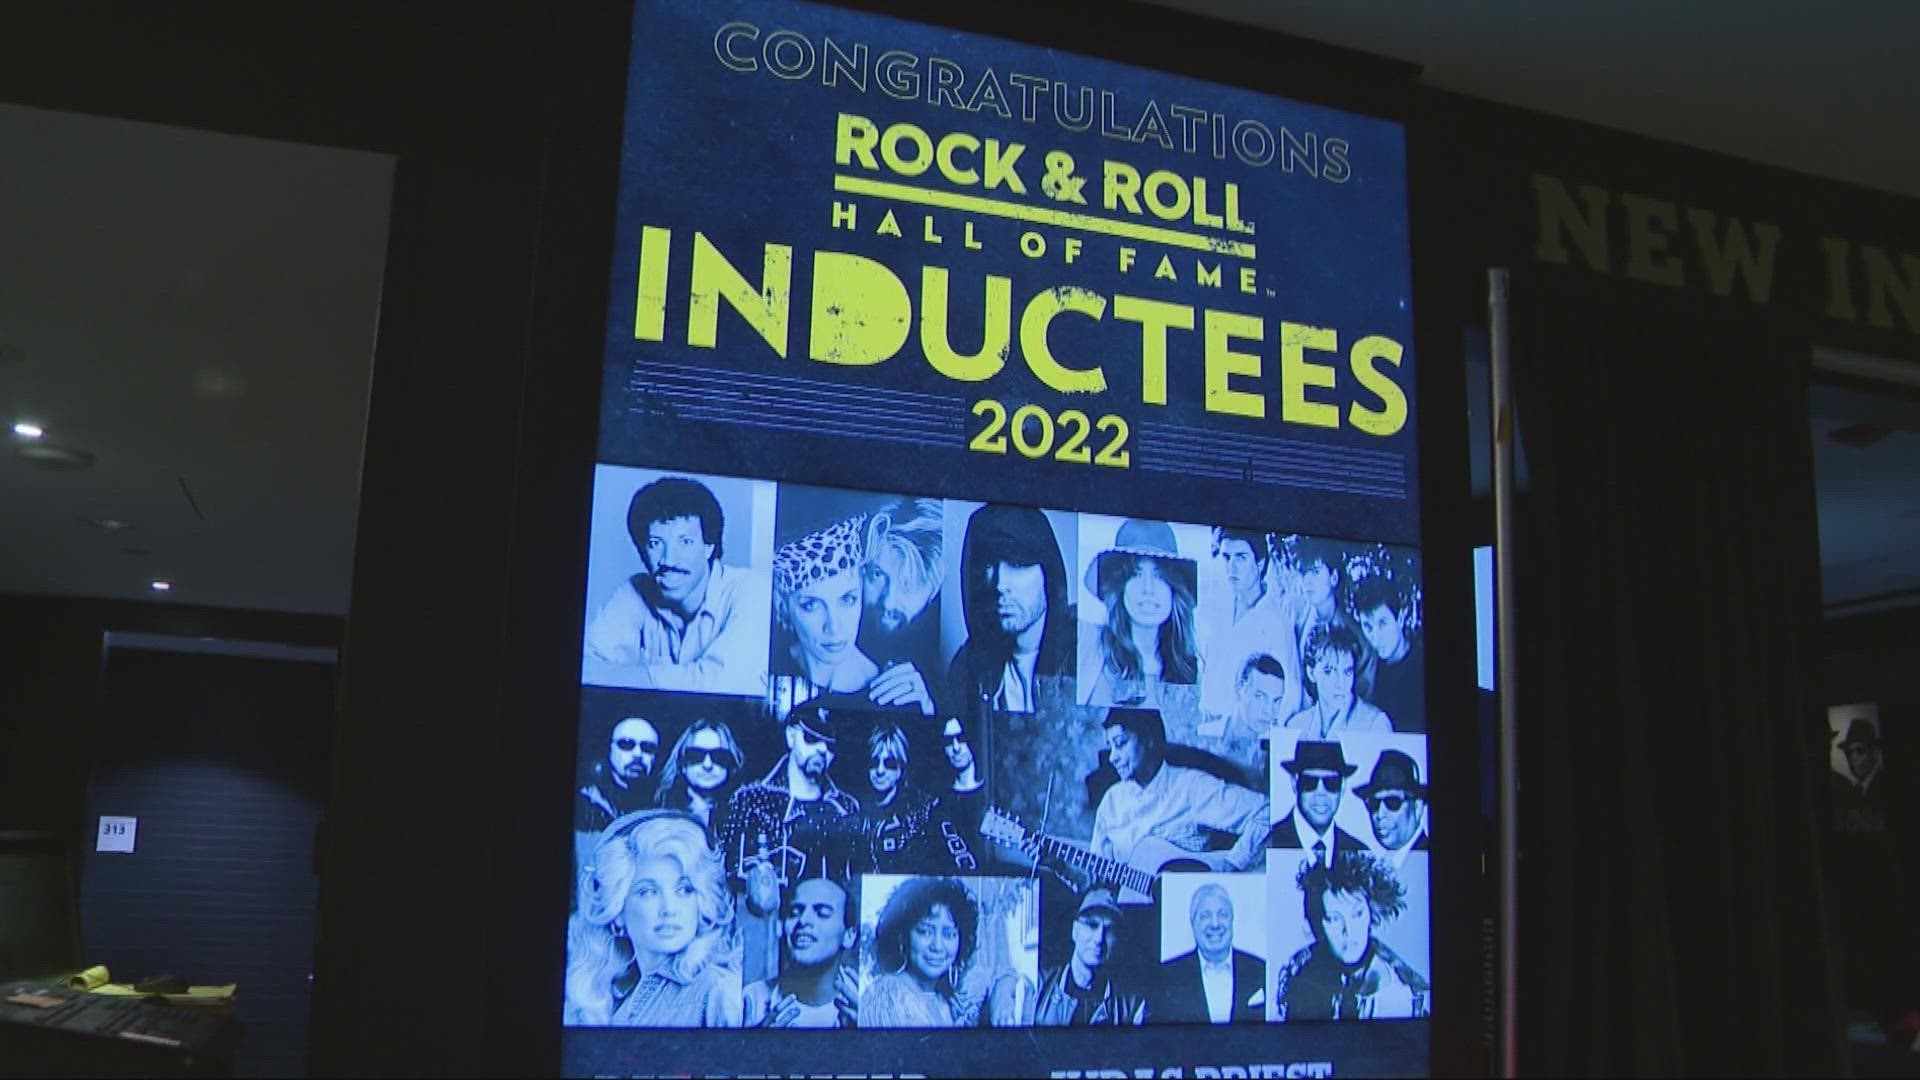 The 2022 Rock and Roll Hall of Fame induction ceremony is welcoming its newest class with 14 inductees -- including Dolly Parton, Pat Benatar, and Duran Duran.